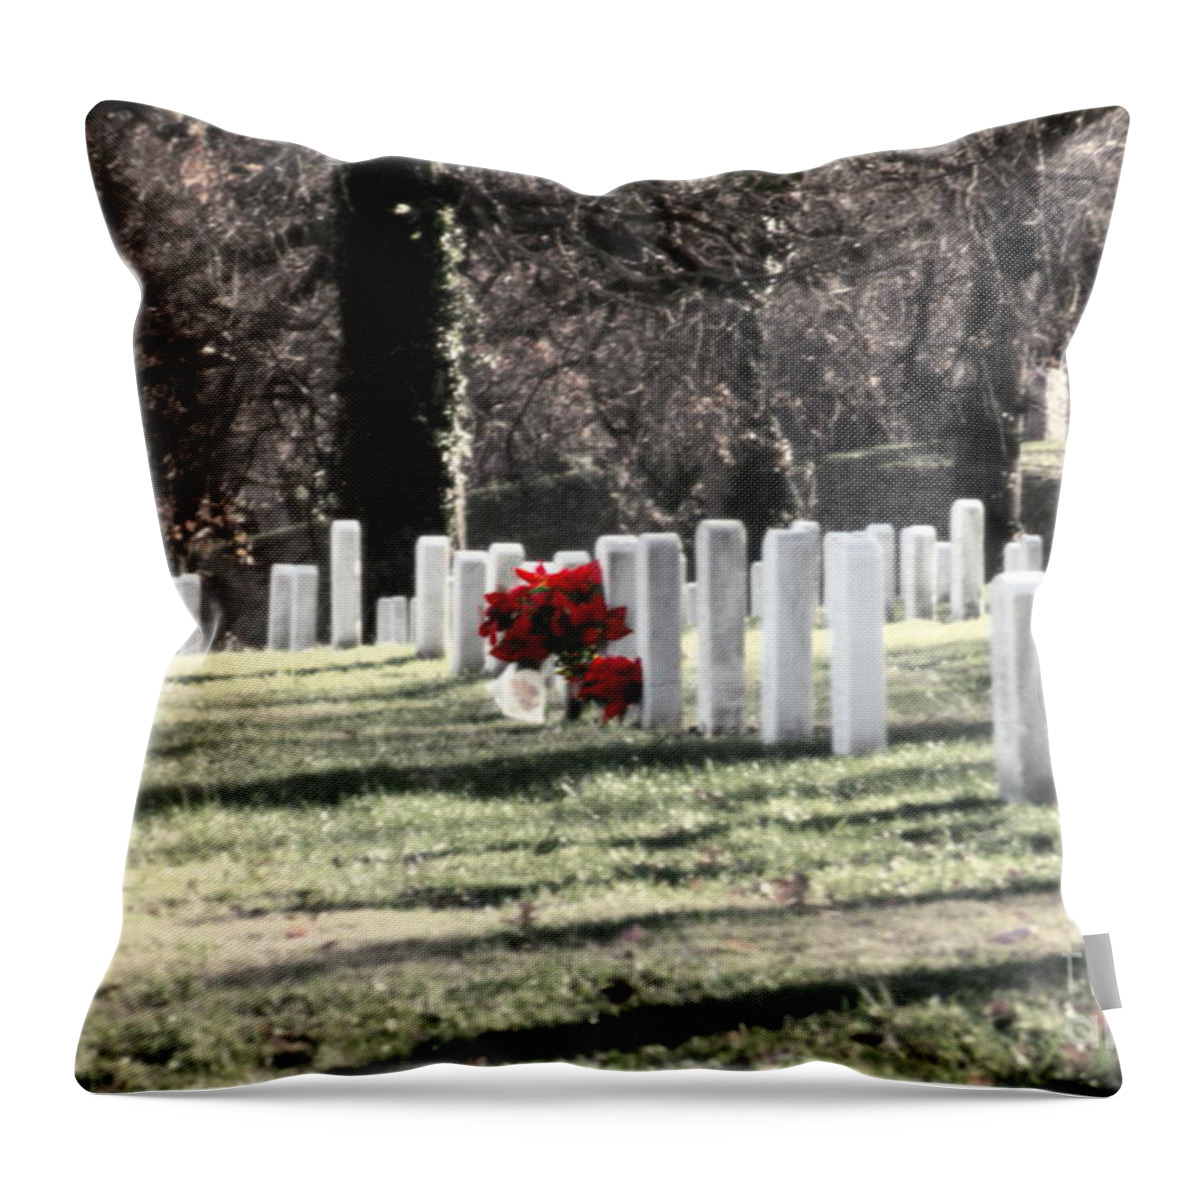 Clay Throw Pillow featuring the photograph Arlington Cemetary by Clayton Bruster